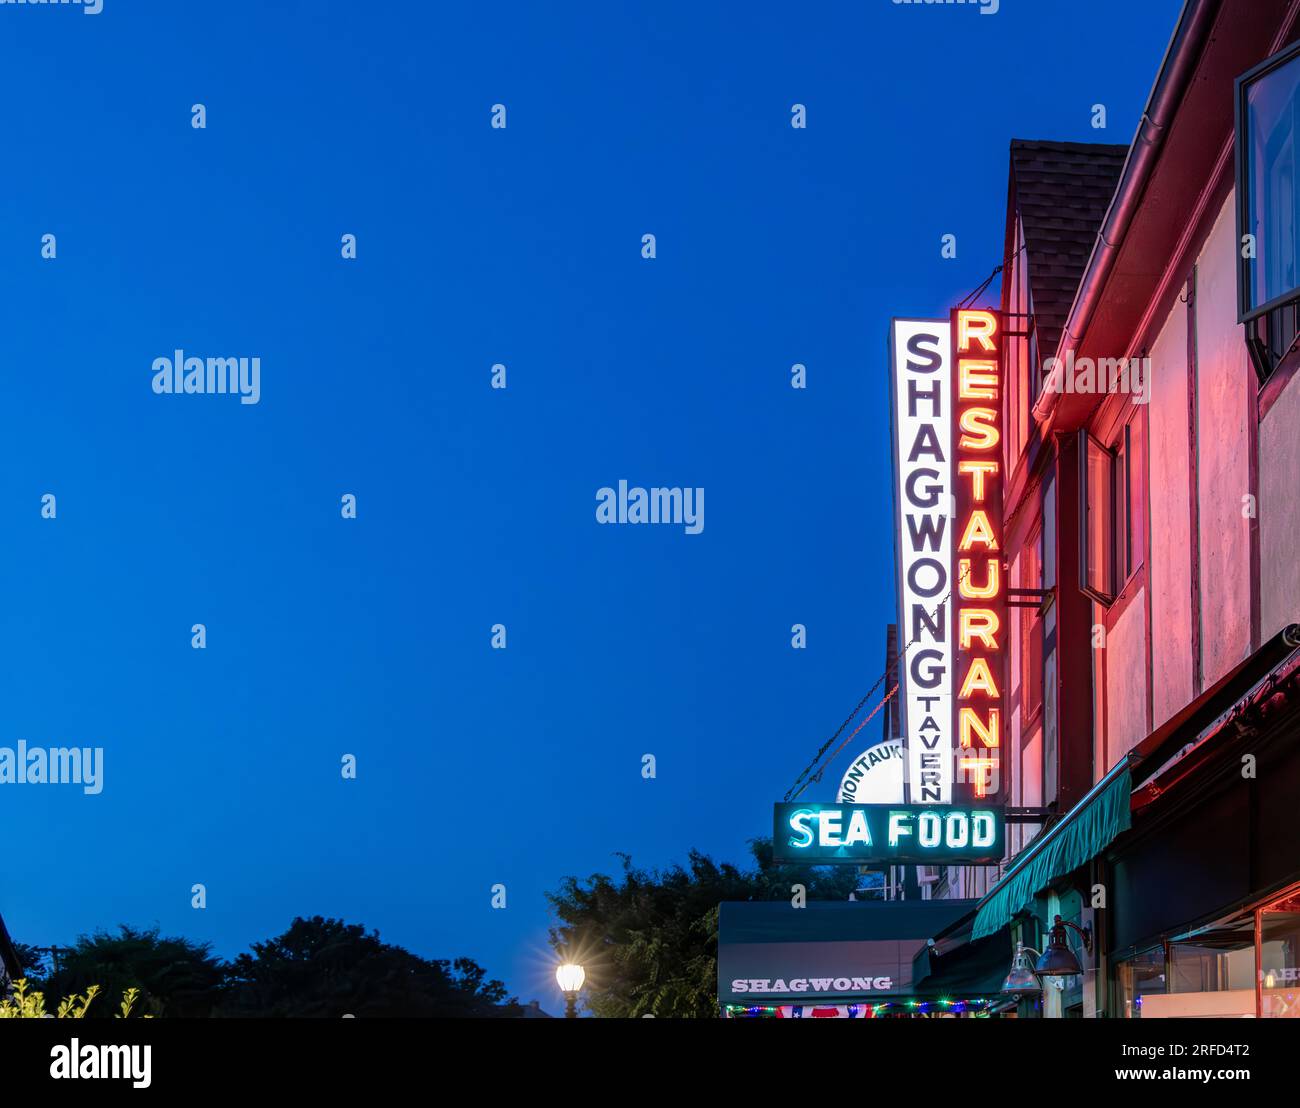 the signs for the Shagwond Tavern in Montauk at night Stock Photo